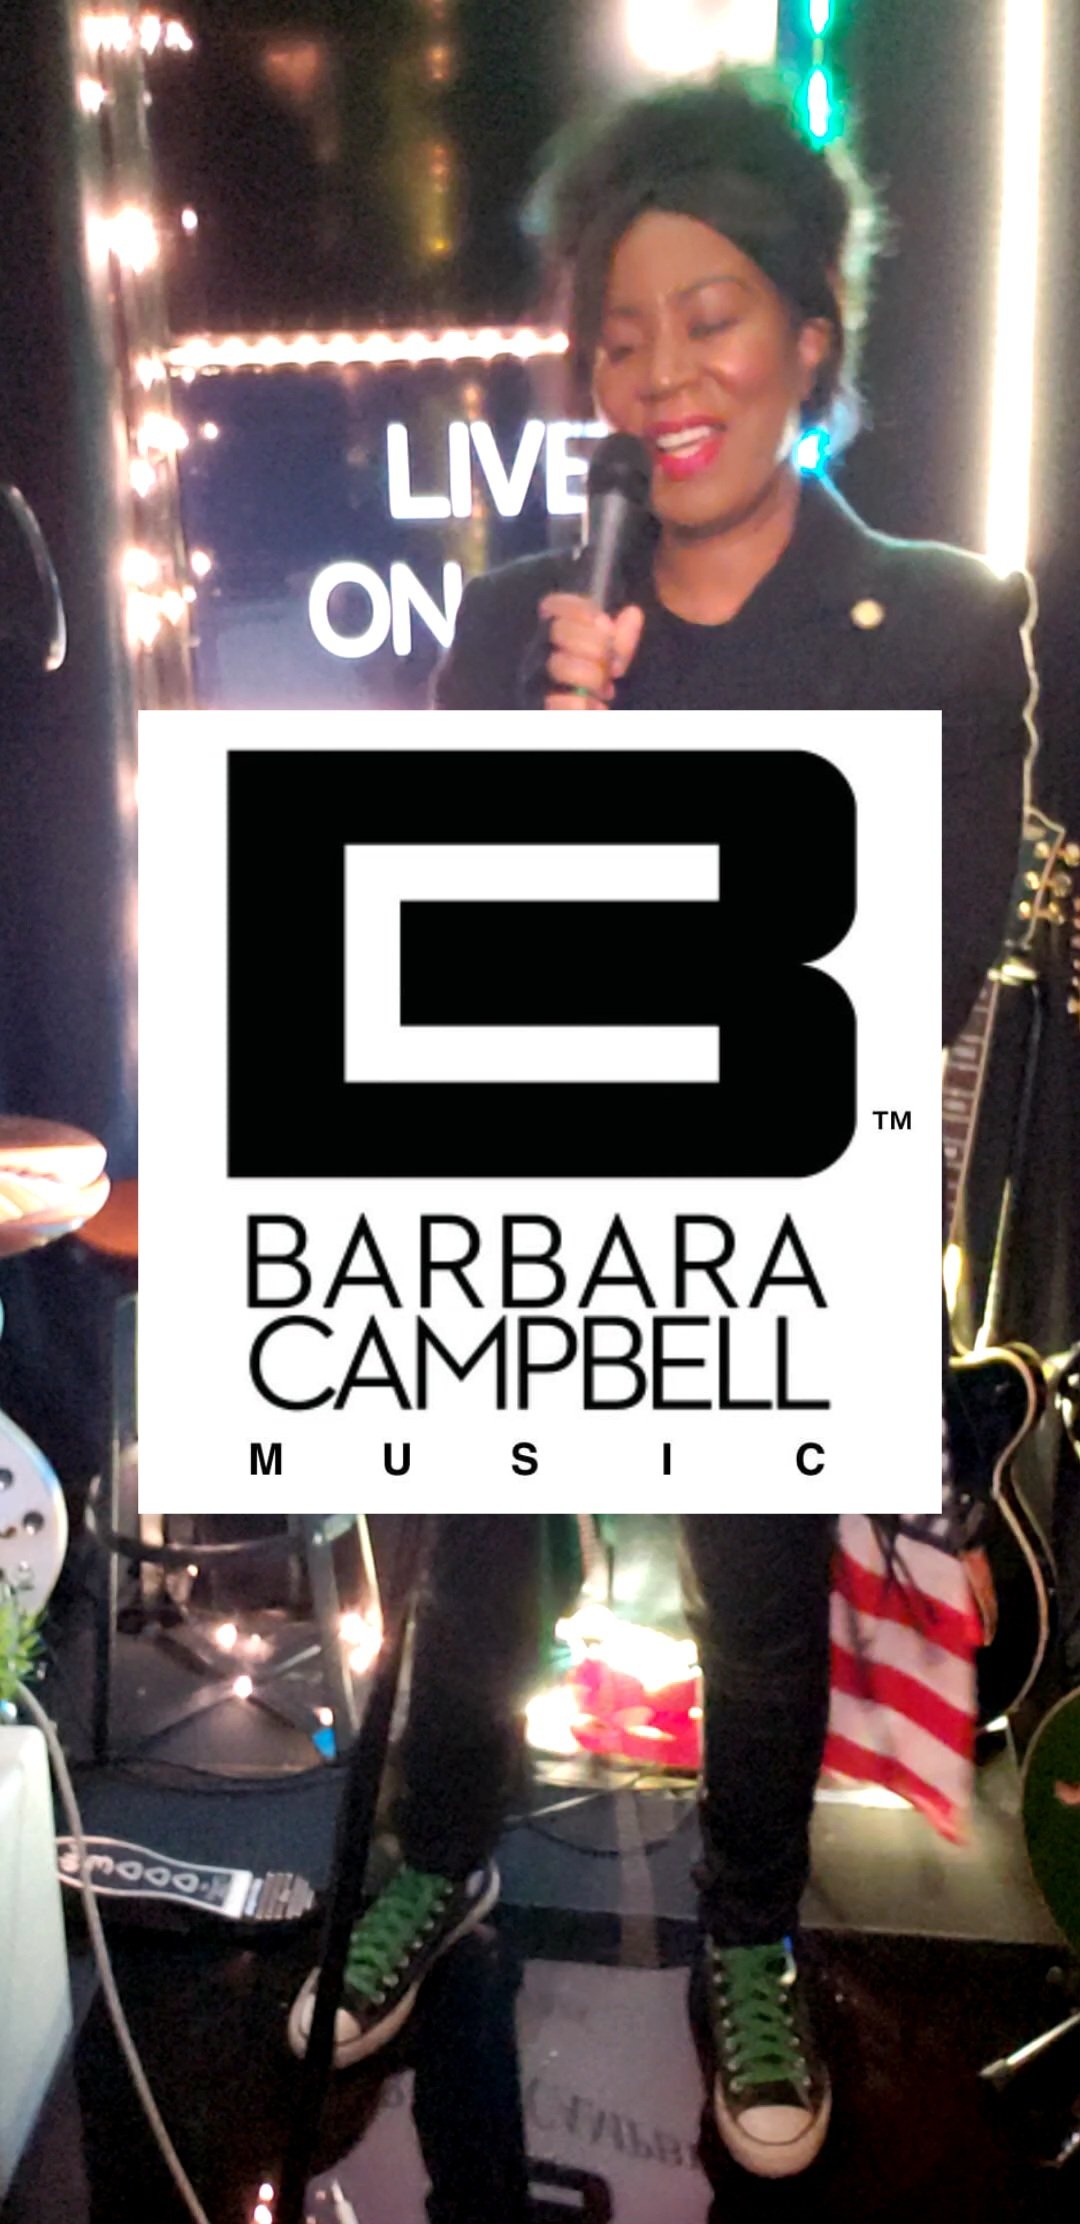 Barbara Campbell Live Performance B On Air On Friday September 23 2022 Live BC™ Airing Soon On Barbara Campbell Televison Recap Behind The Scene Live Recordings Taped and Filmed Live From Brooklyn Barbara Campbell Music.jpg3.jpg